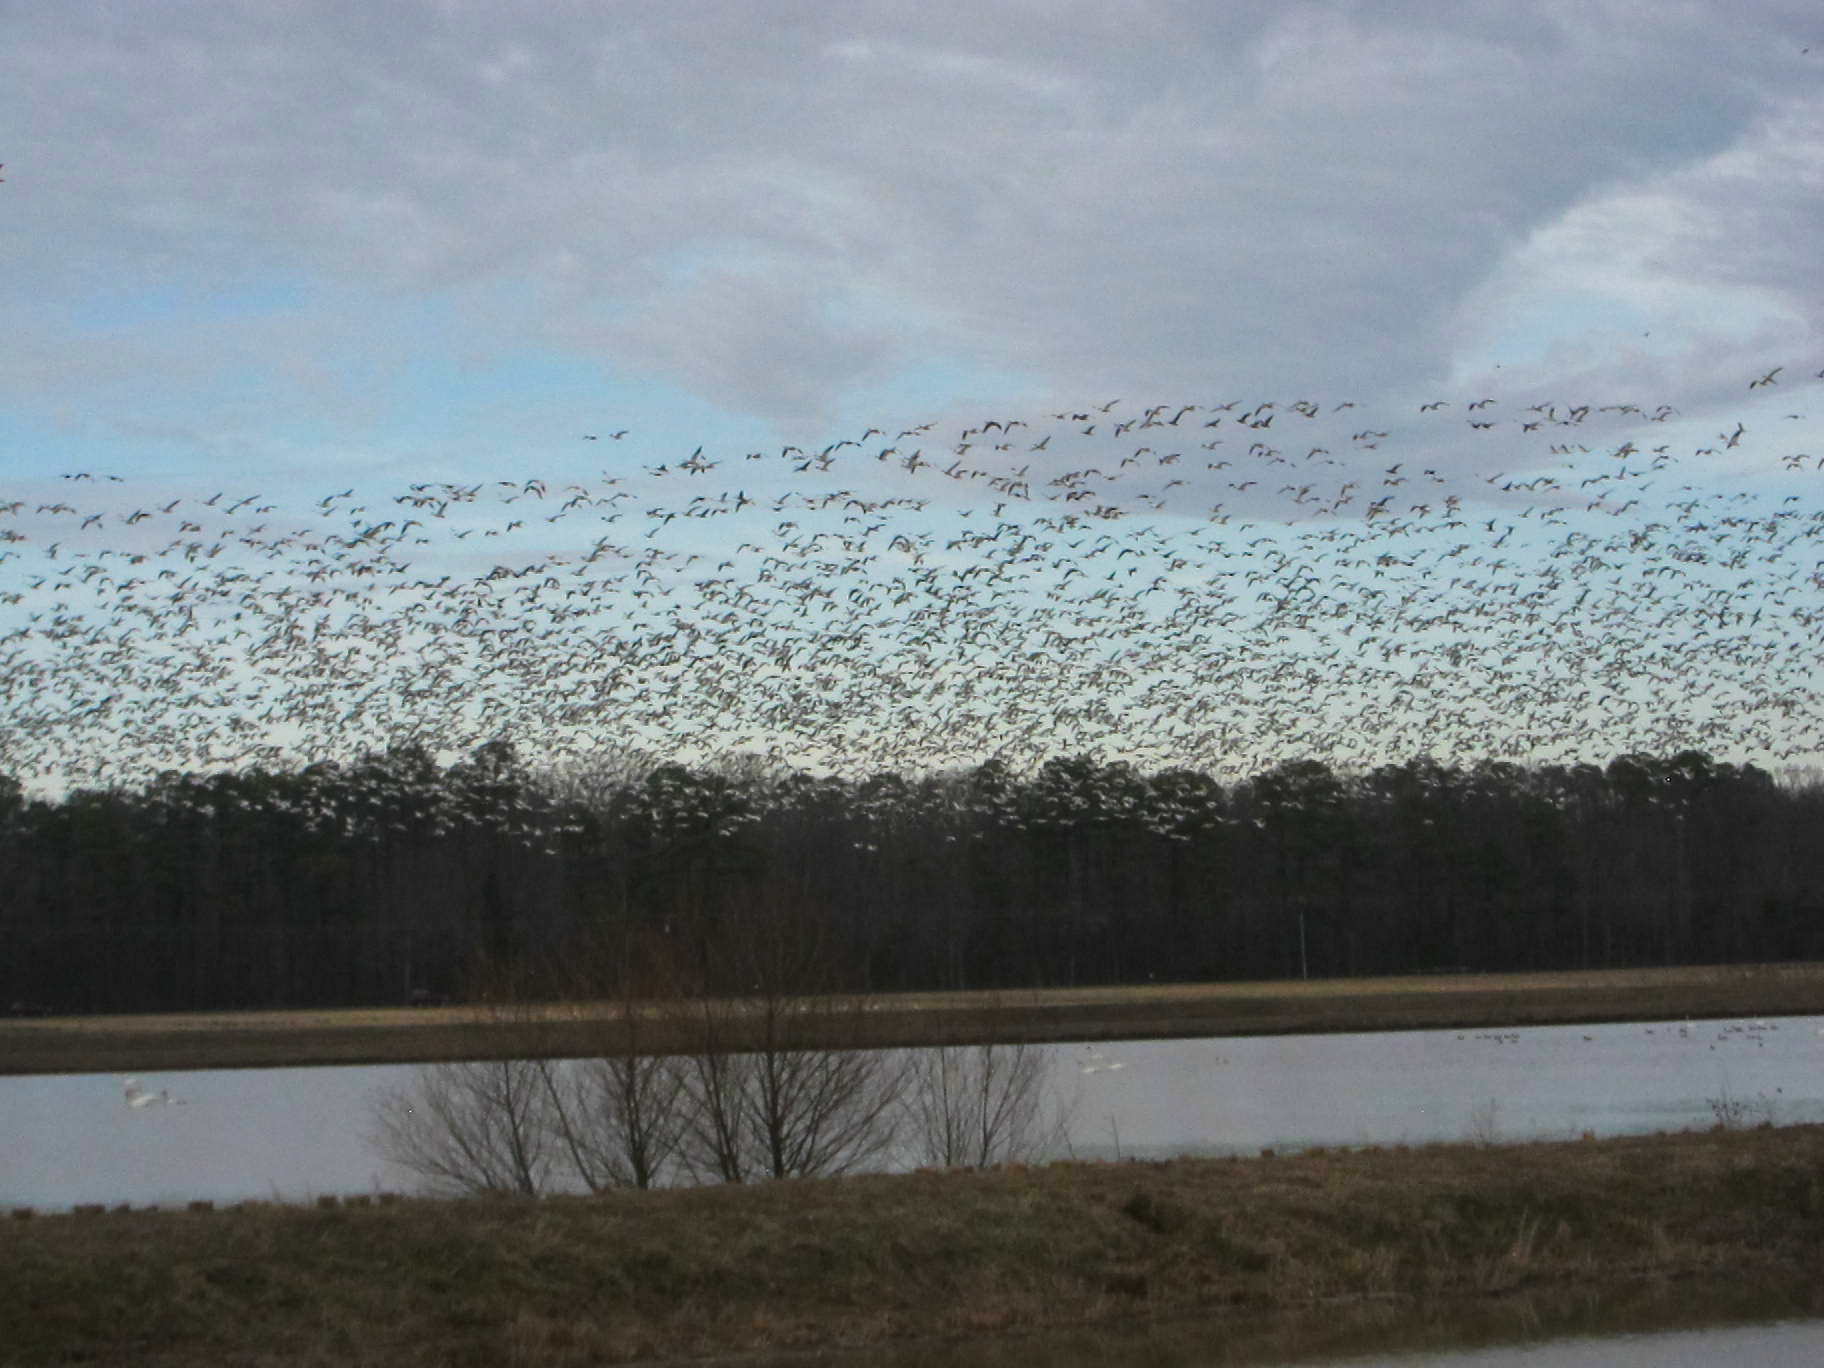 A flock of geese takes wing at Blackwater National Wildlife Refuge in summer 2020. Migratory birds could benefit as more coastline is added to refuges due to saltwater intrusion. Credit: Bill Lambrecht/University of Maryland